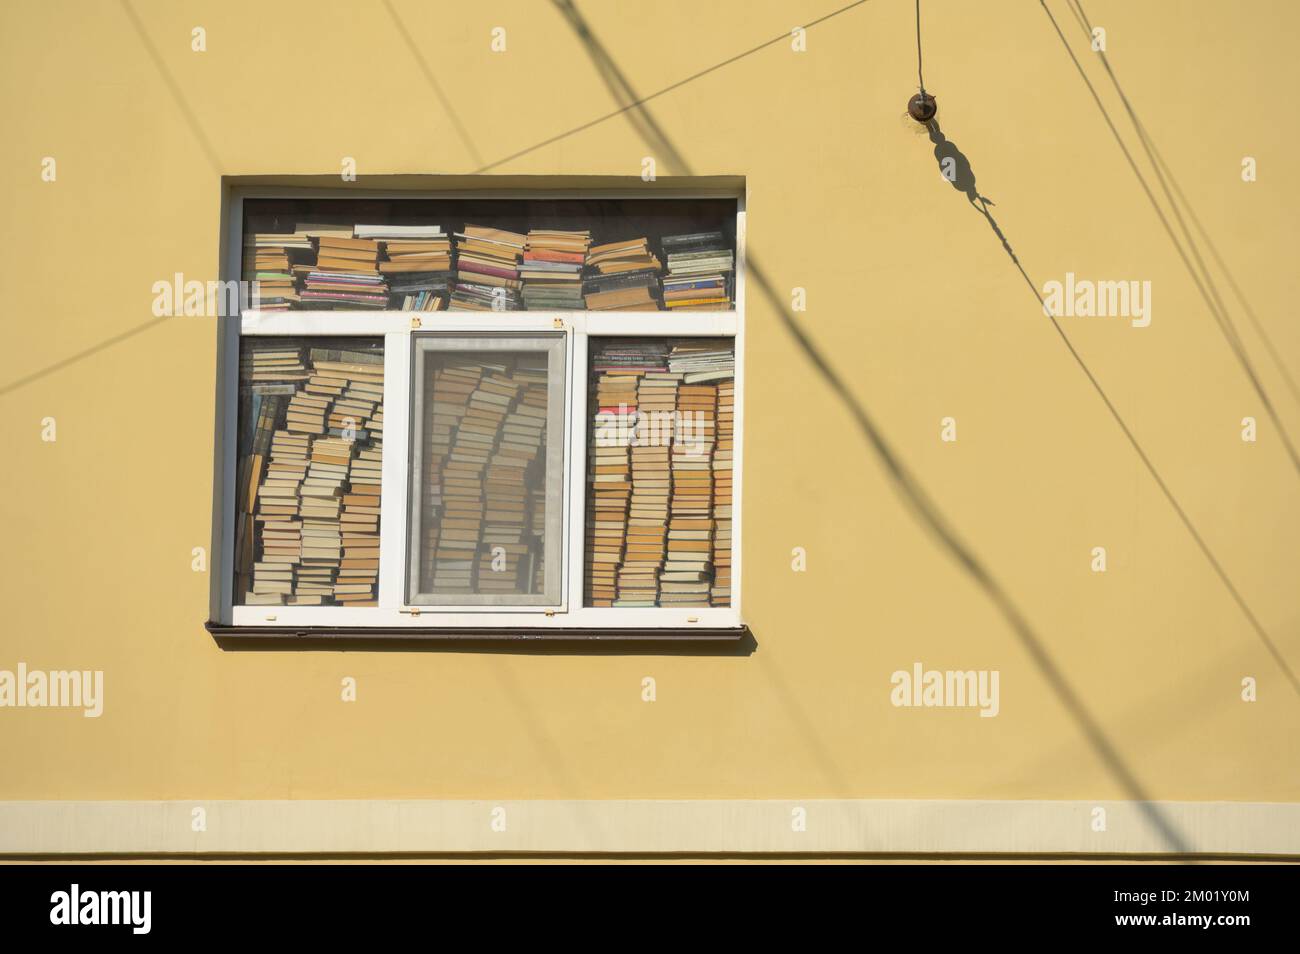 Stacks of books in a window of an apartment building Stock Photo